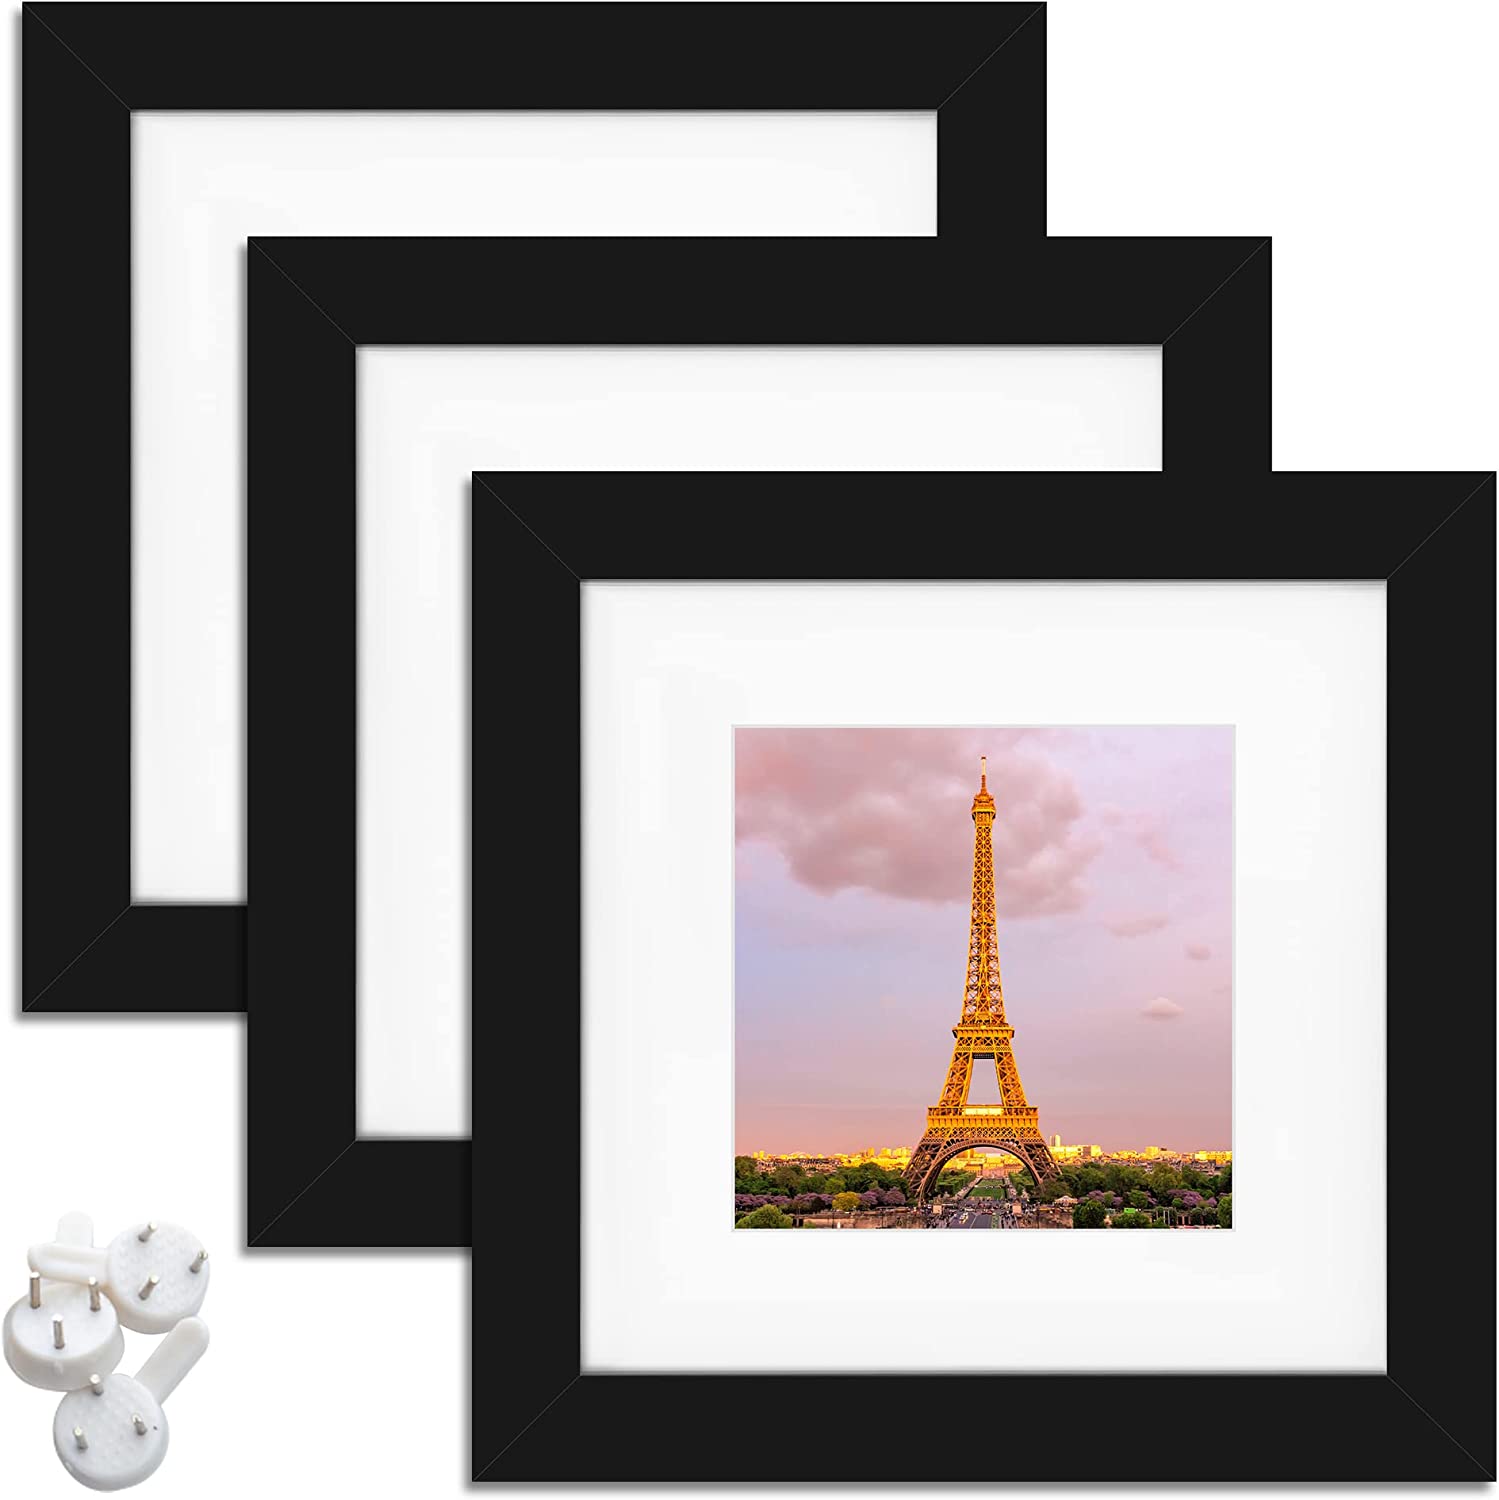 6x6 Picture Frame - Contemporary Picture Frame Complete With UV - On Sale -  Bed Bath & Beyond - 35903027